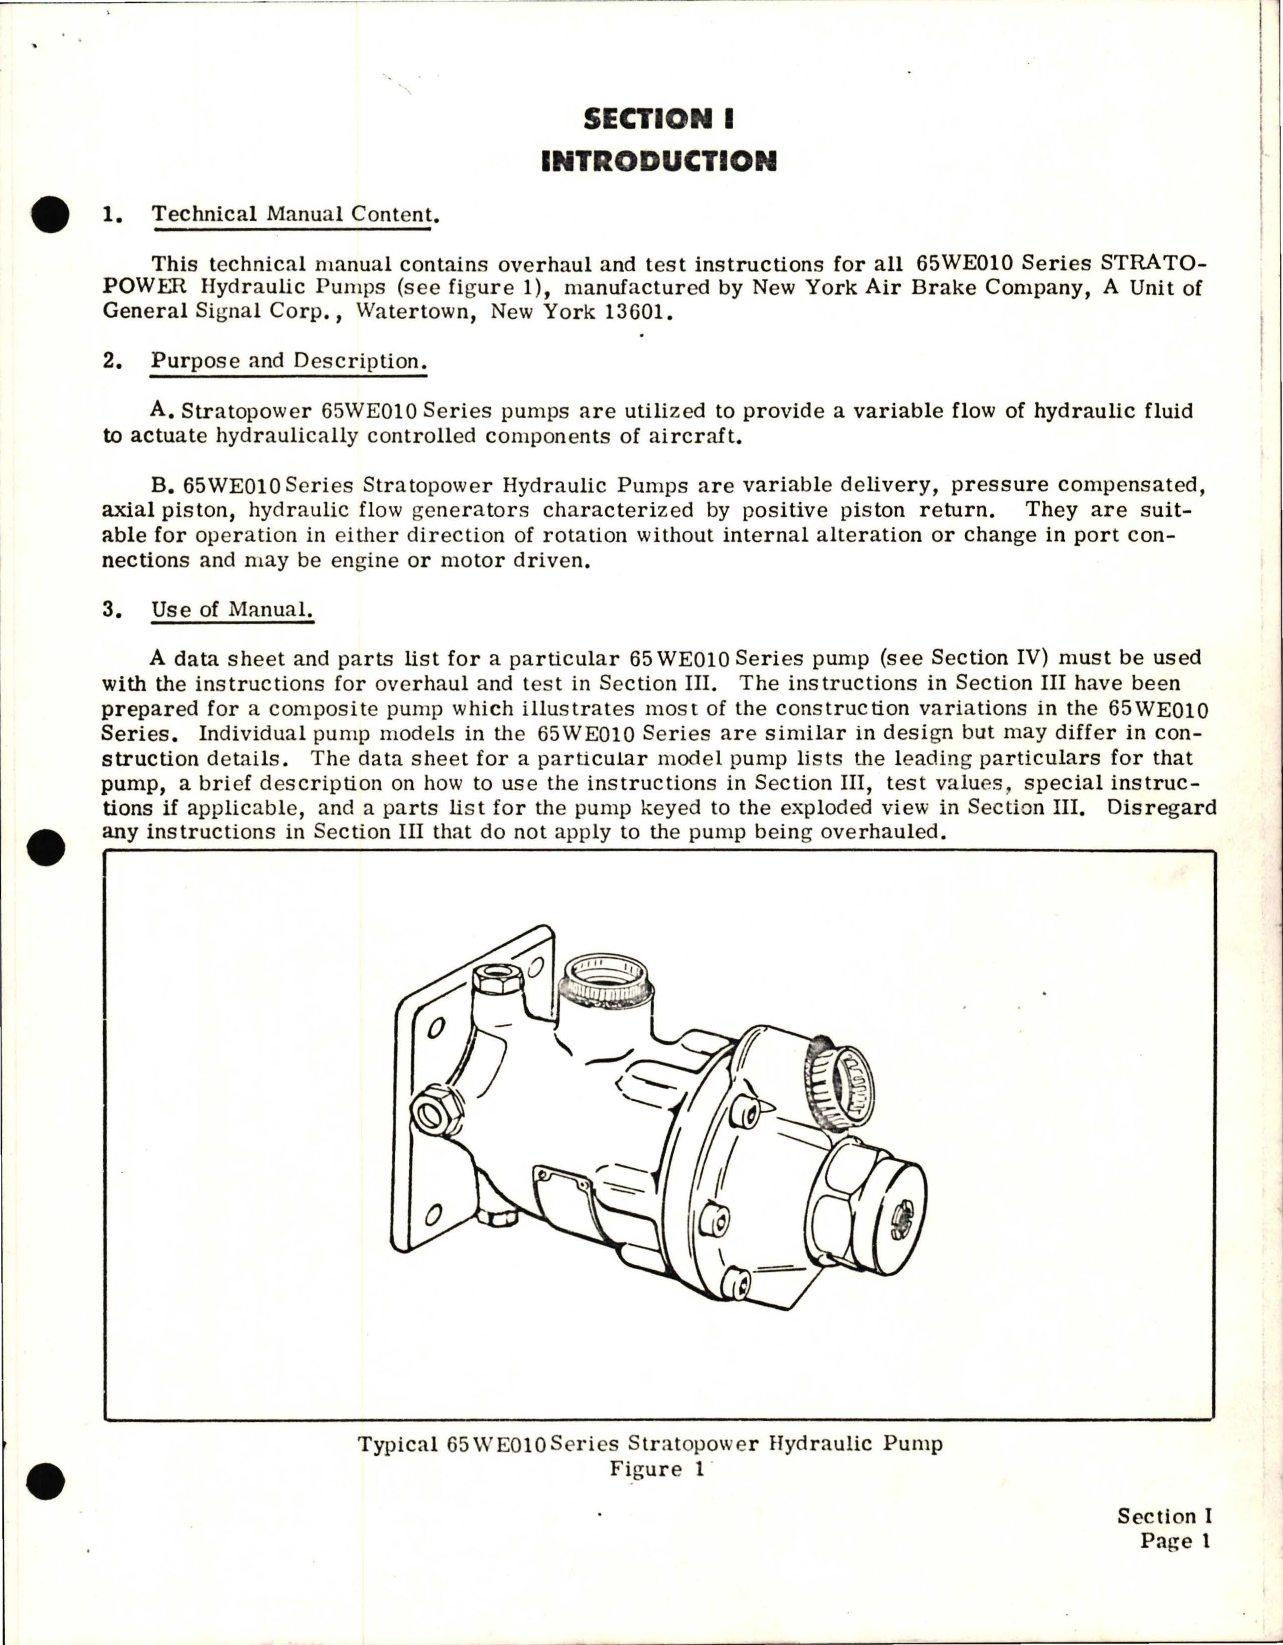 Sample page 7 from AirCorps Library document: Overhaul Instructions with Parts Breakdown for Stratopower Hydraulic Pump - 65WE010 Series 